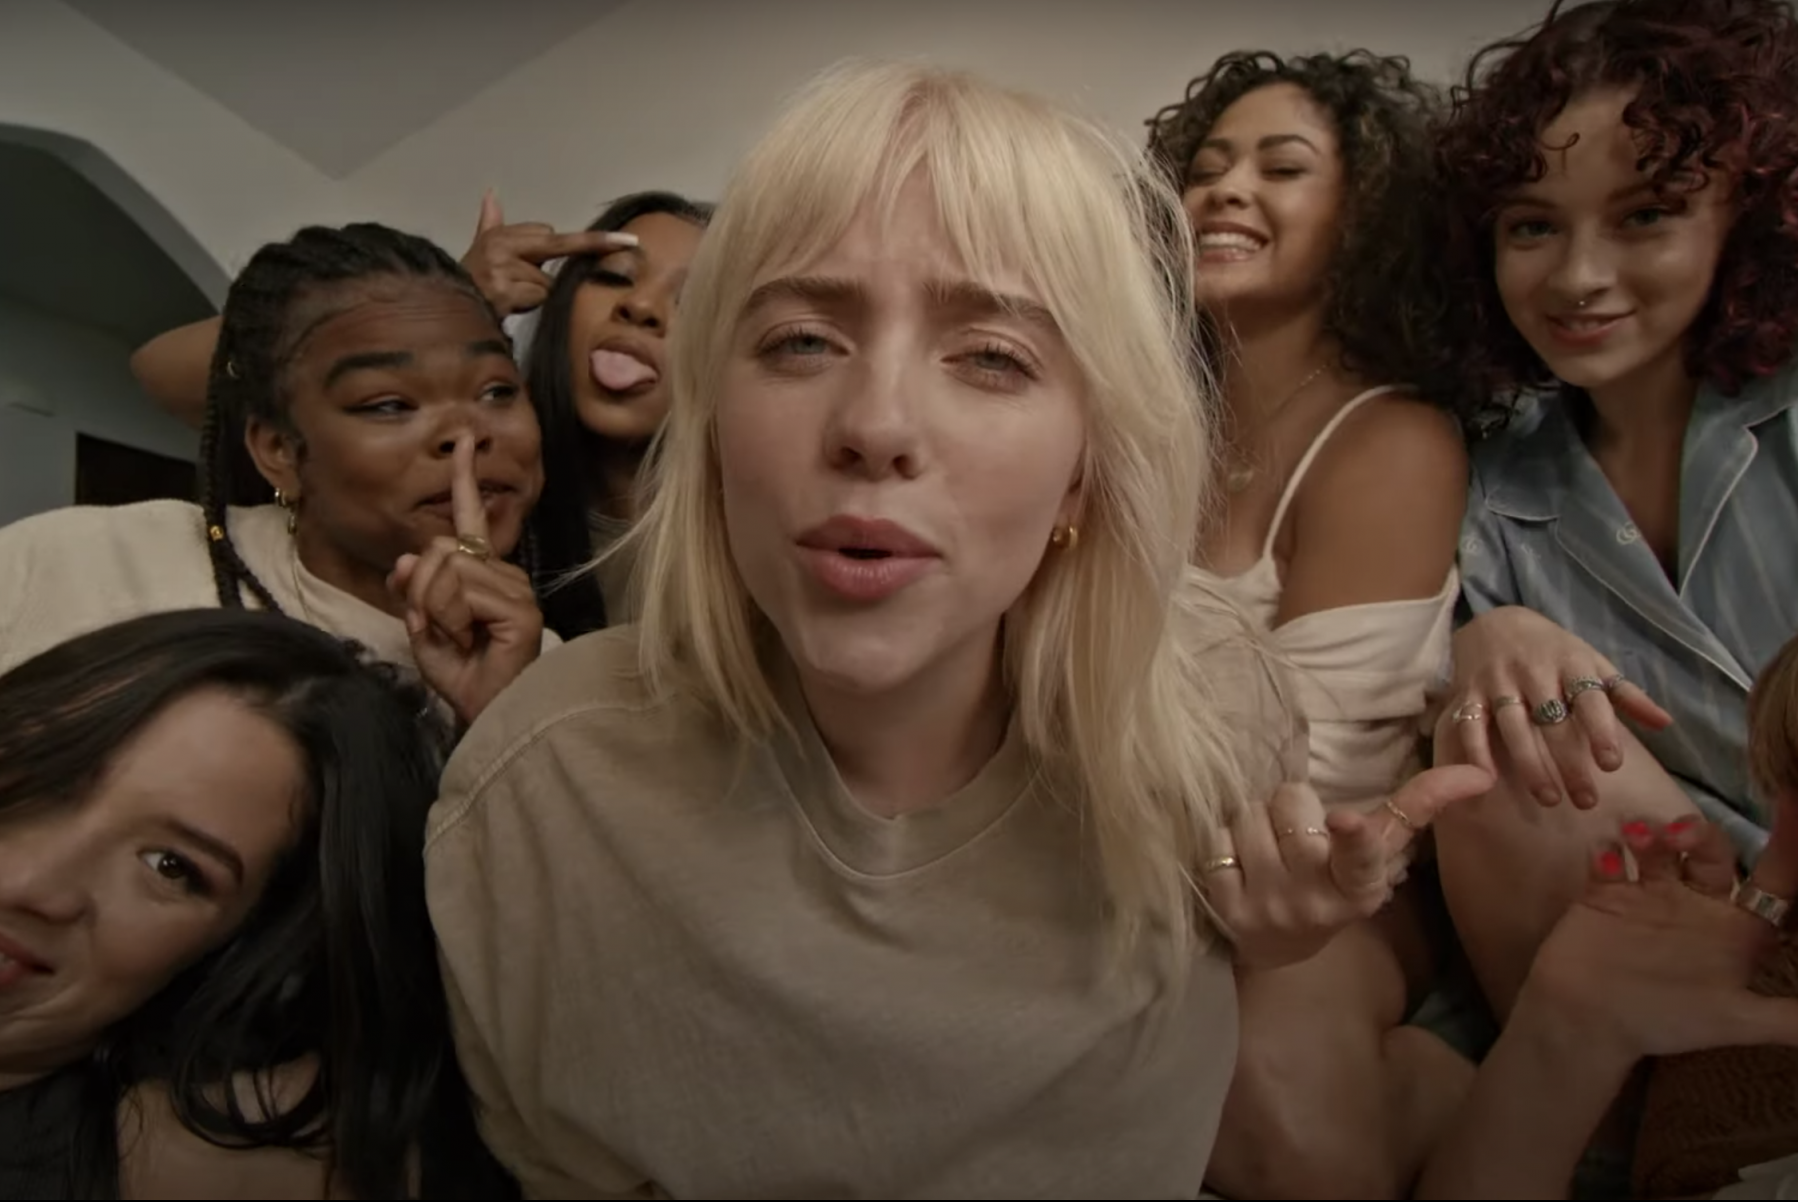 In an article about queerbaiting, a screenshot from the Billie Eilish video for Lost Cause